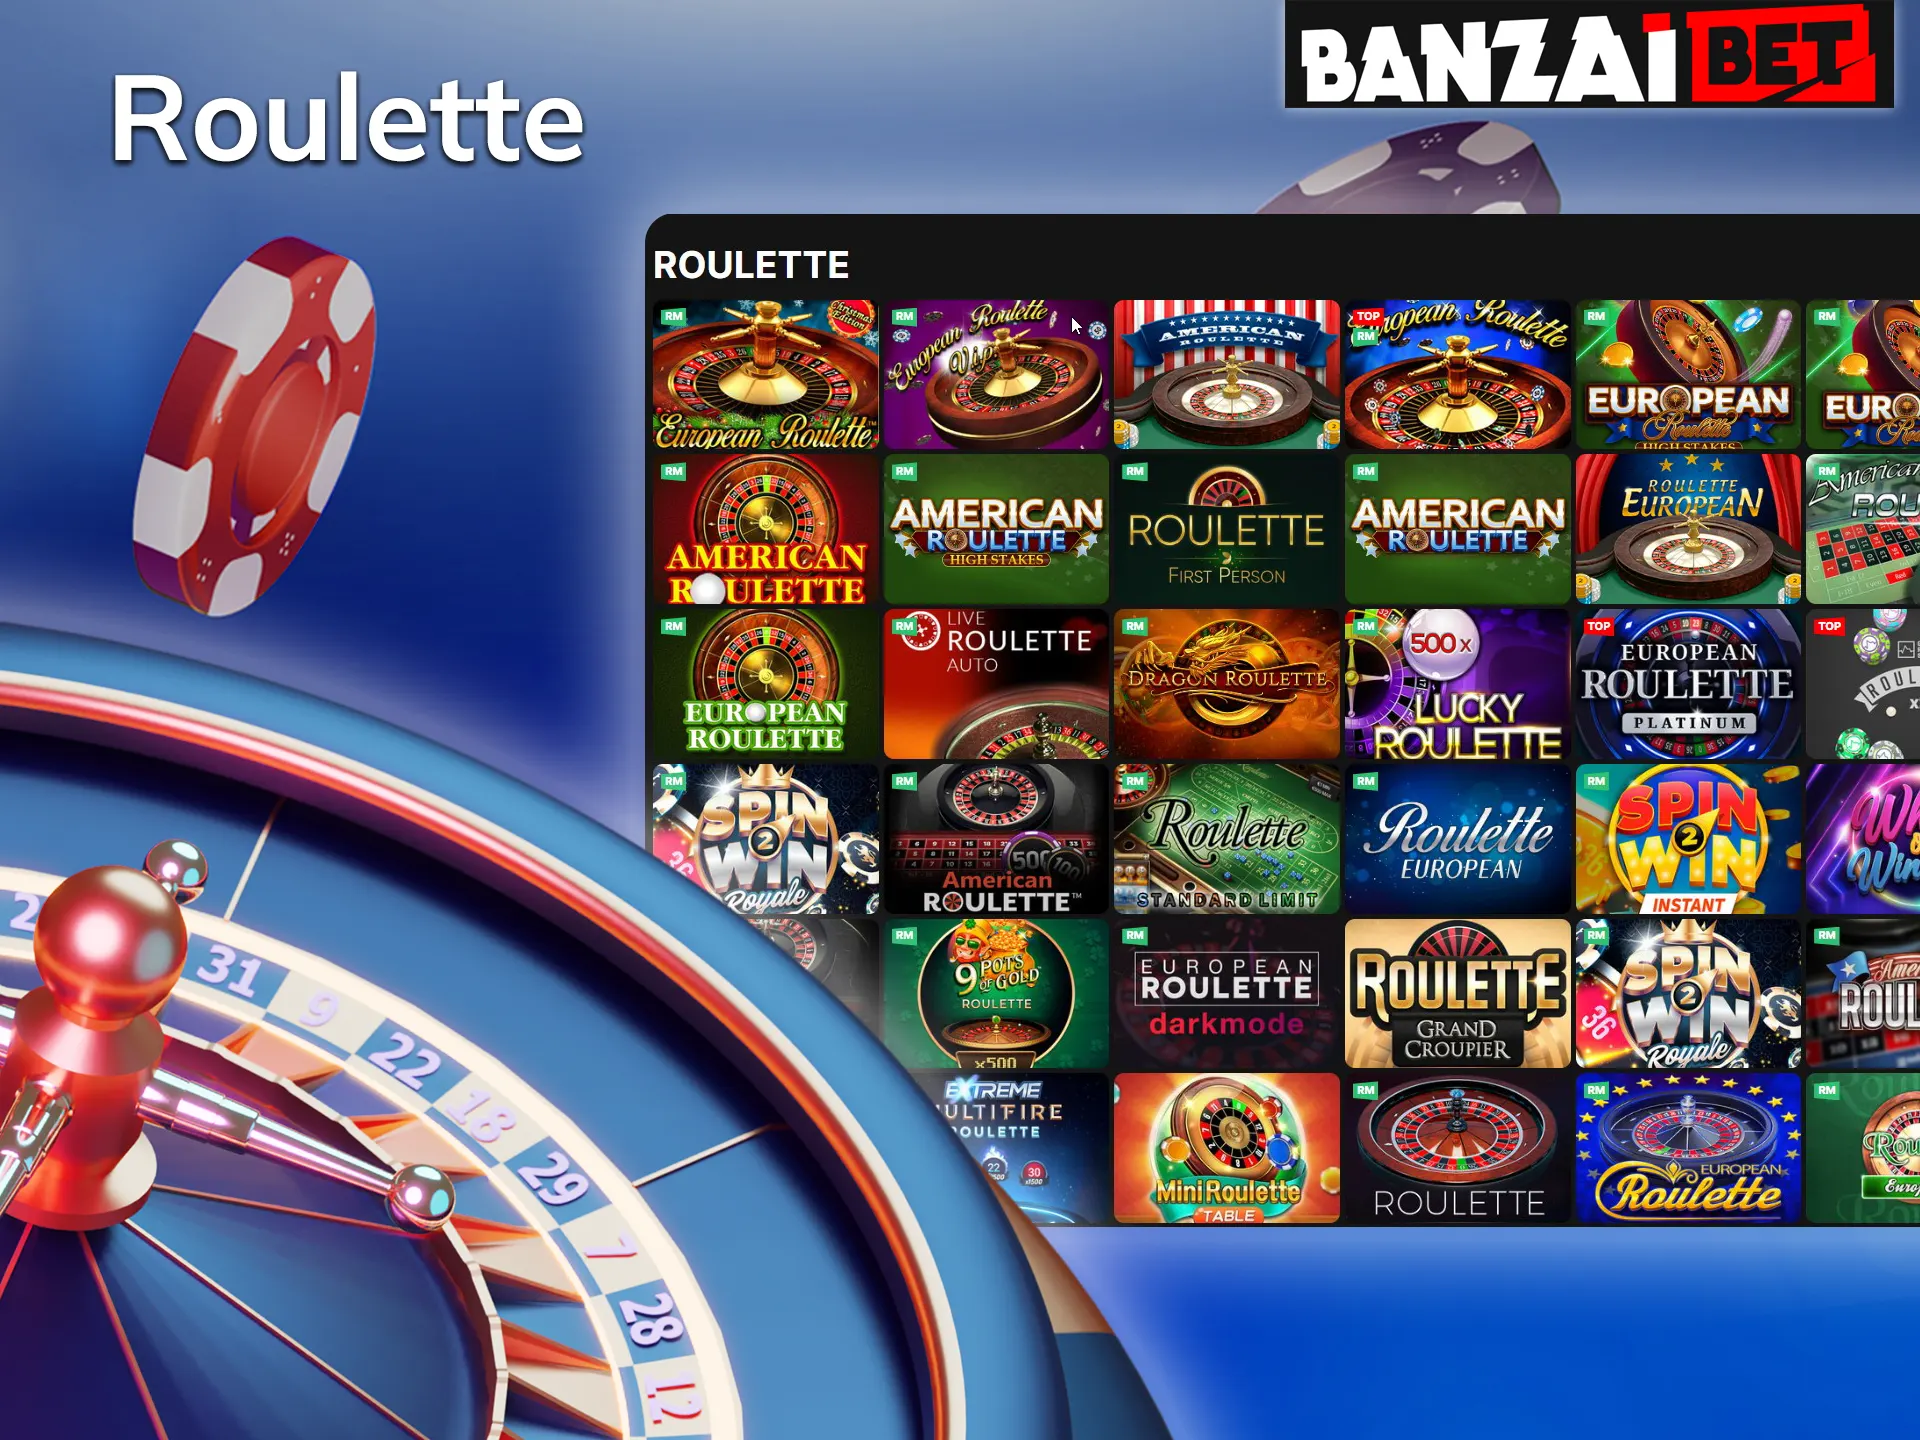 Play roulette at online casino Banzai Bet.